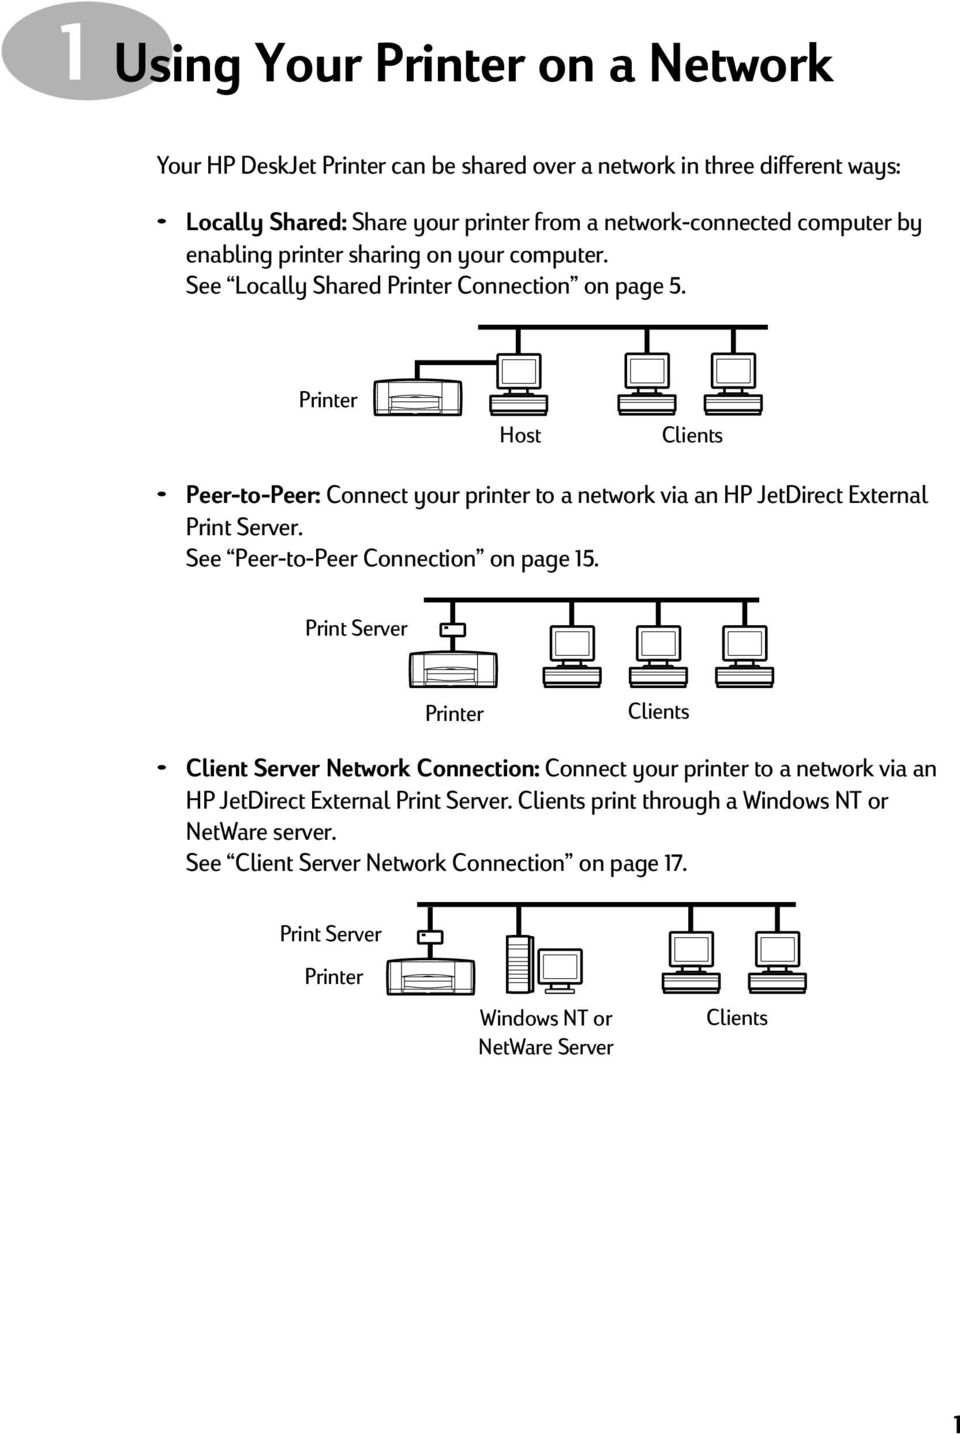 Printer Host Clients Peer-to-Peer: Connect your printer to a network via an HP JetDirect External Print Server. See Peer-to-Peer Connection on page 15.